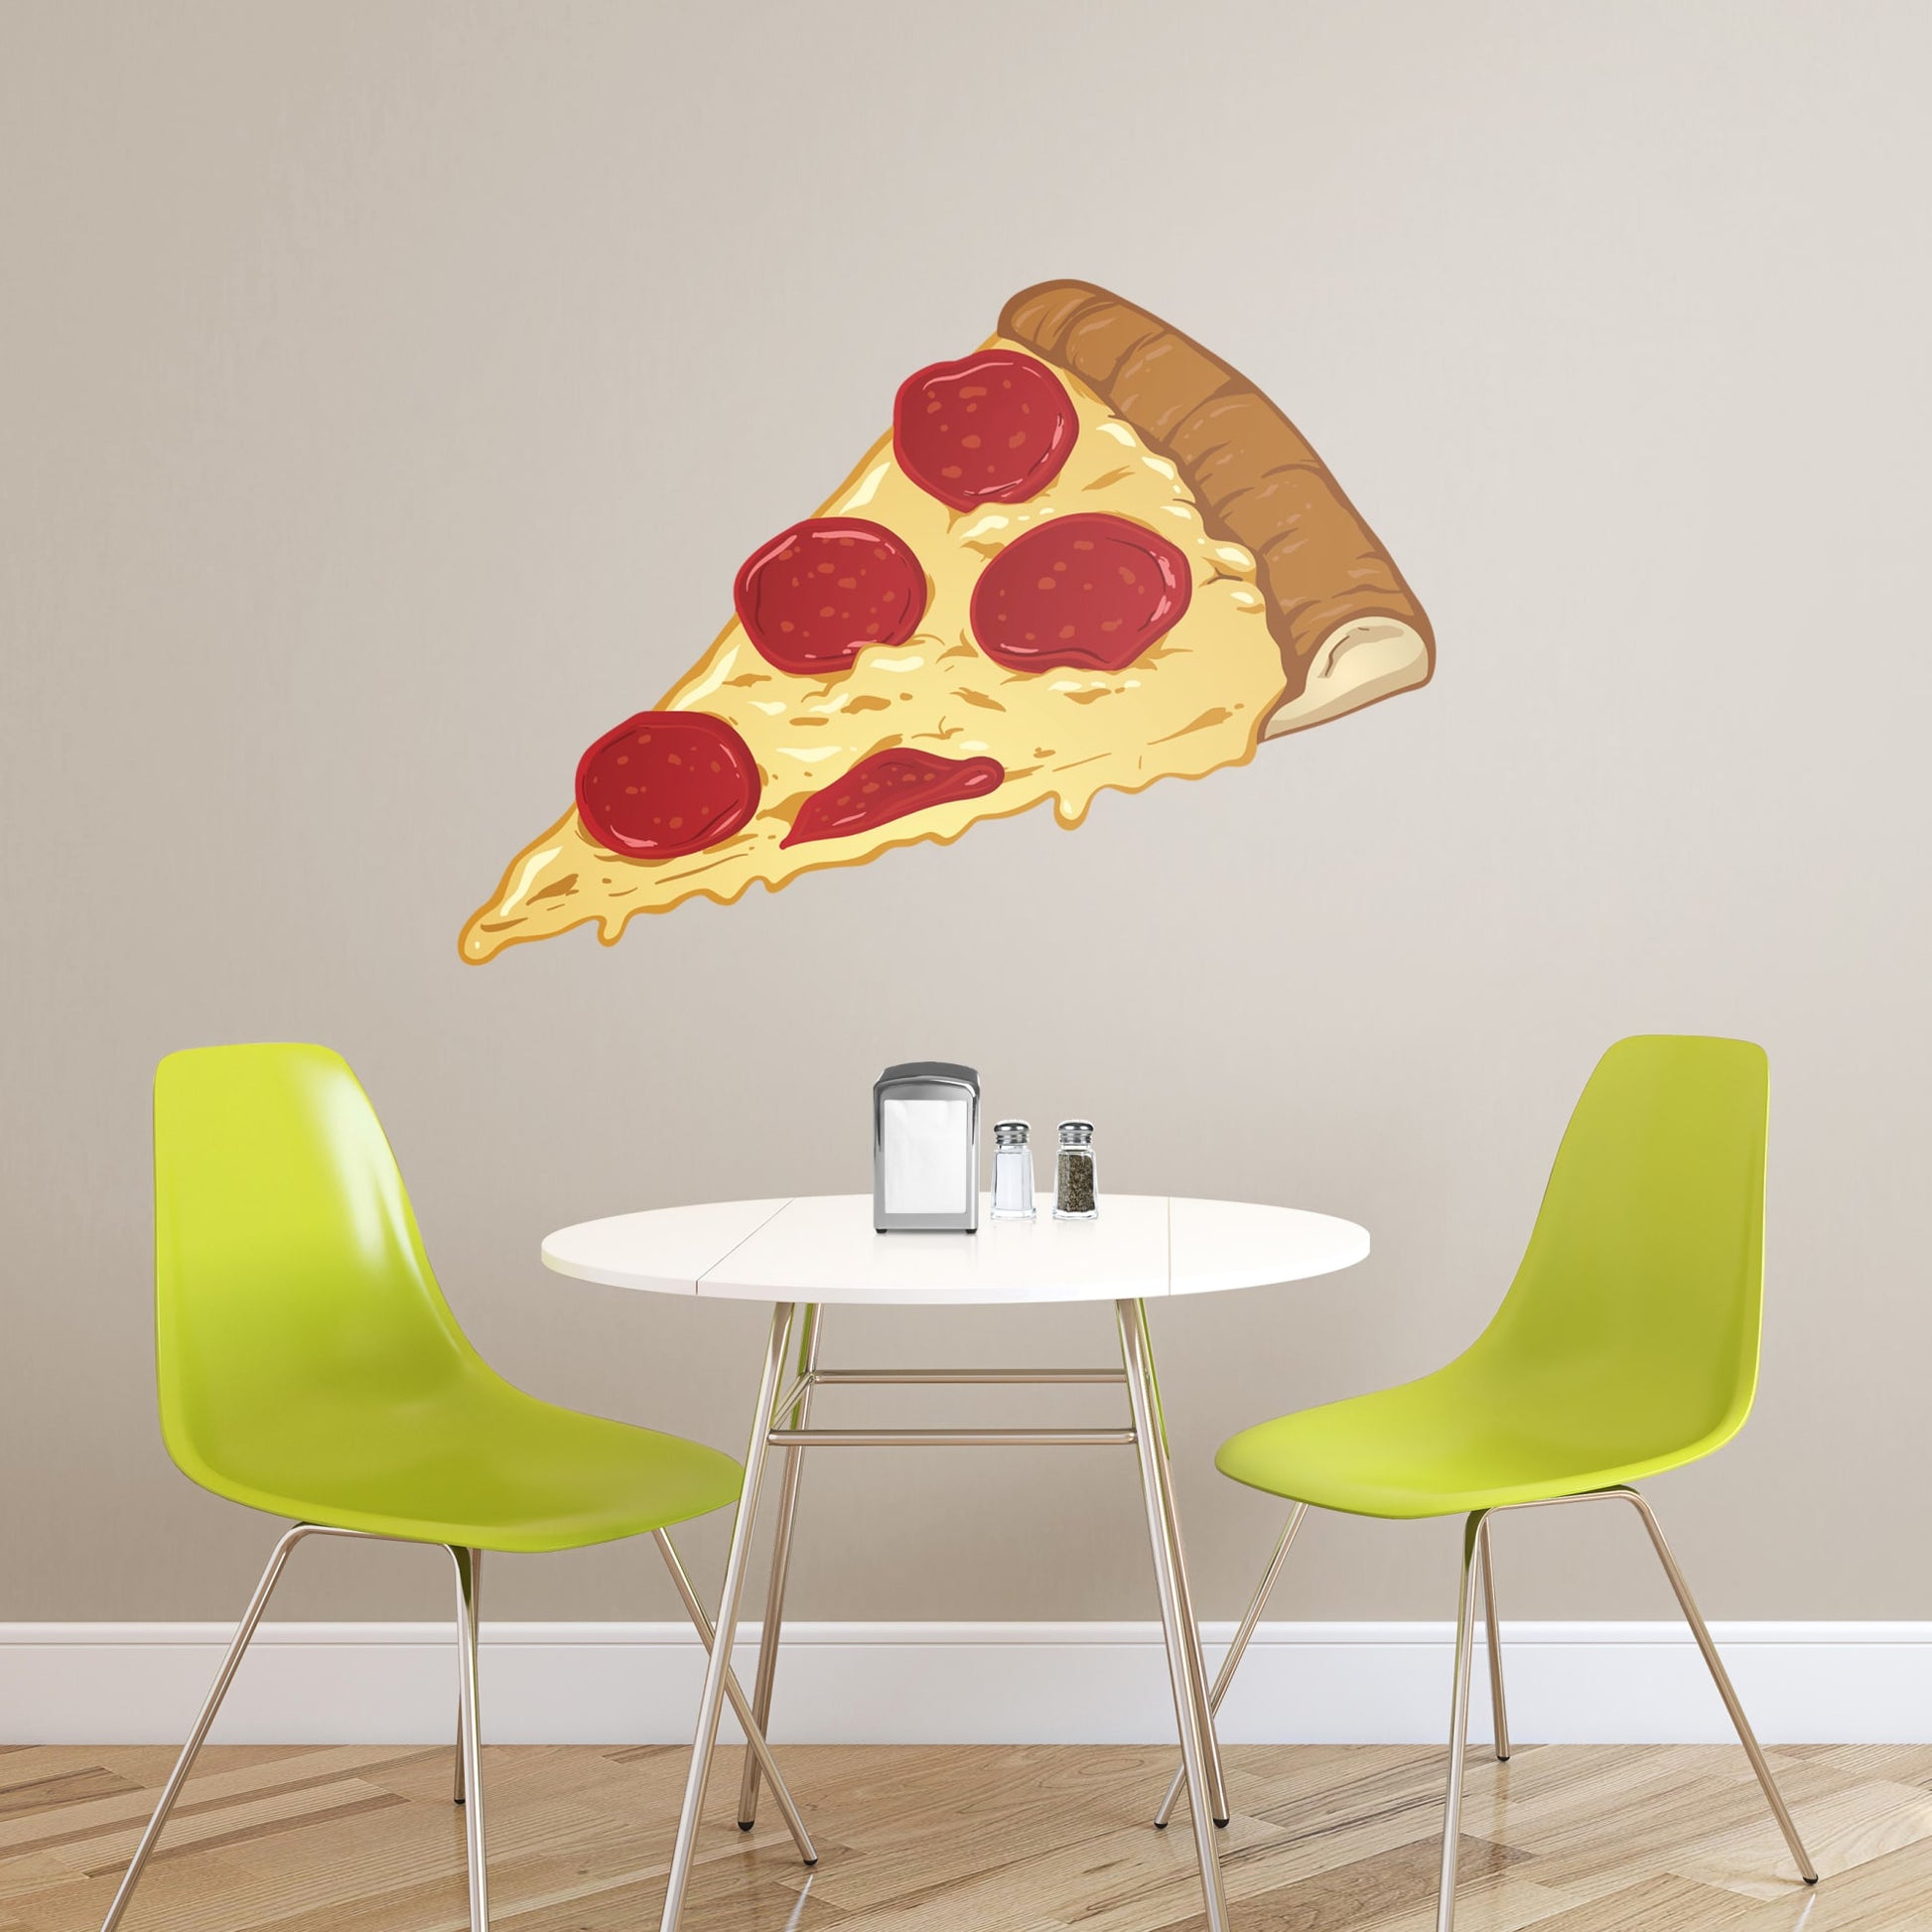 X-Large Pizza + 2 Decals (33"W x 23"H)